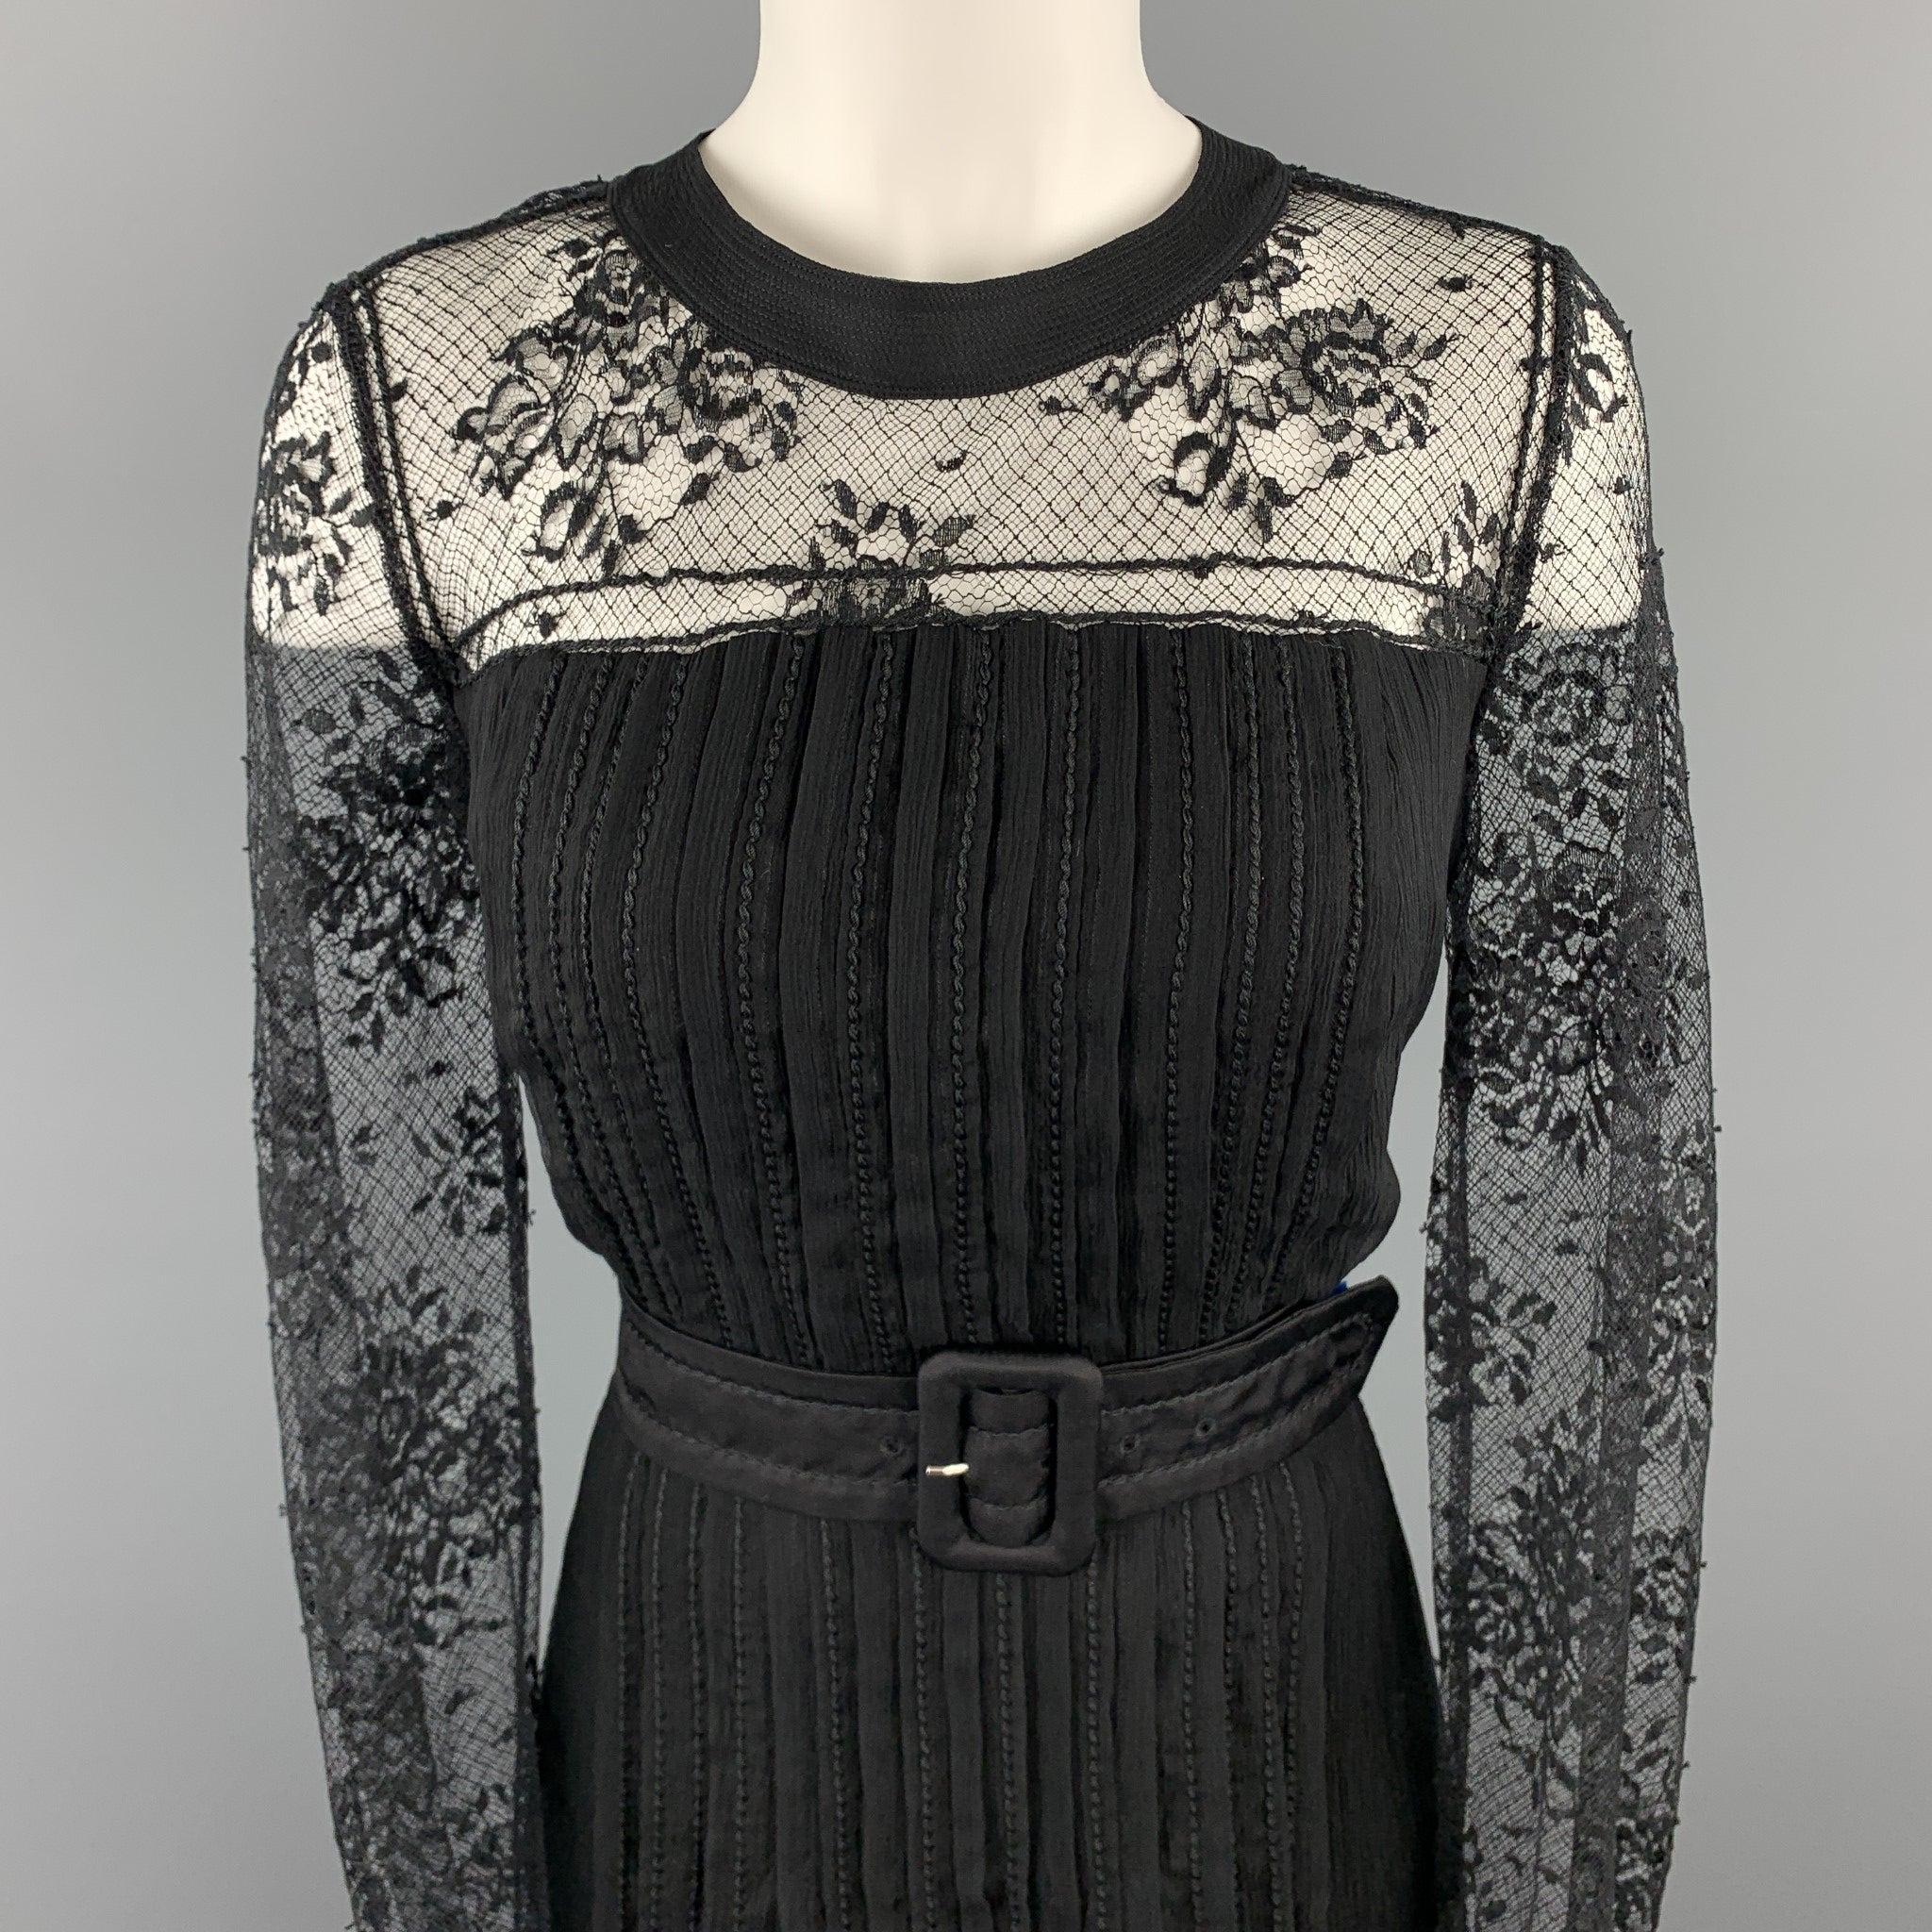 PRADA cocktail dress comes in black pleated silk crepe chiffon with top stitching throughout, belted waist, lace long sleeve top, and tied back neck. Made in Italy.Excellent
Pre-Owned Condition. 

Marked:  IT 46 

Measurements: 
 
Shoulder:
14